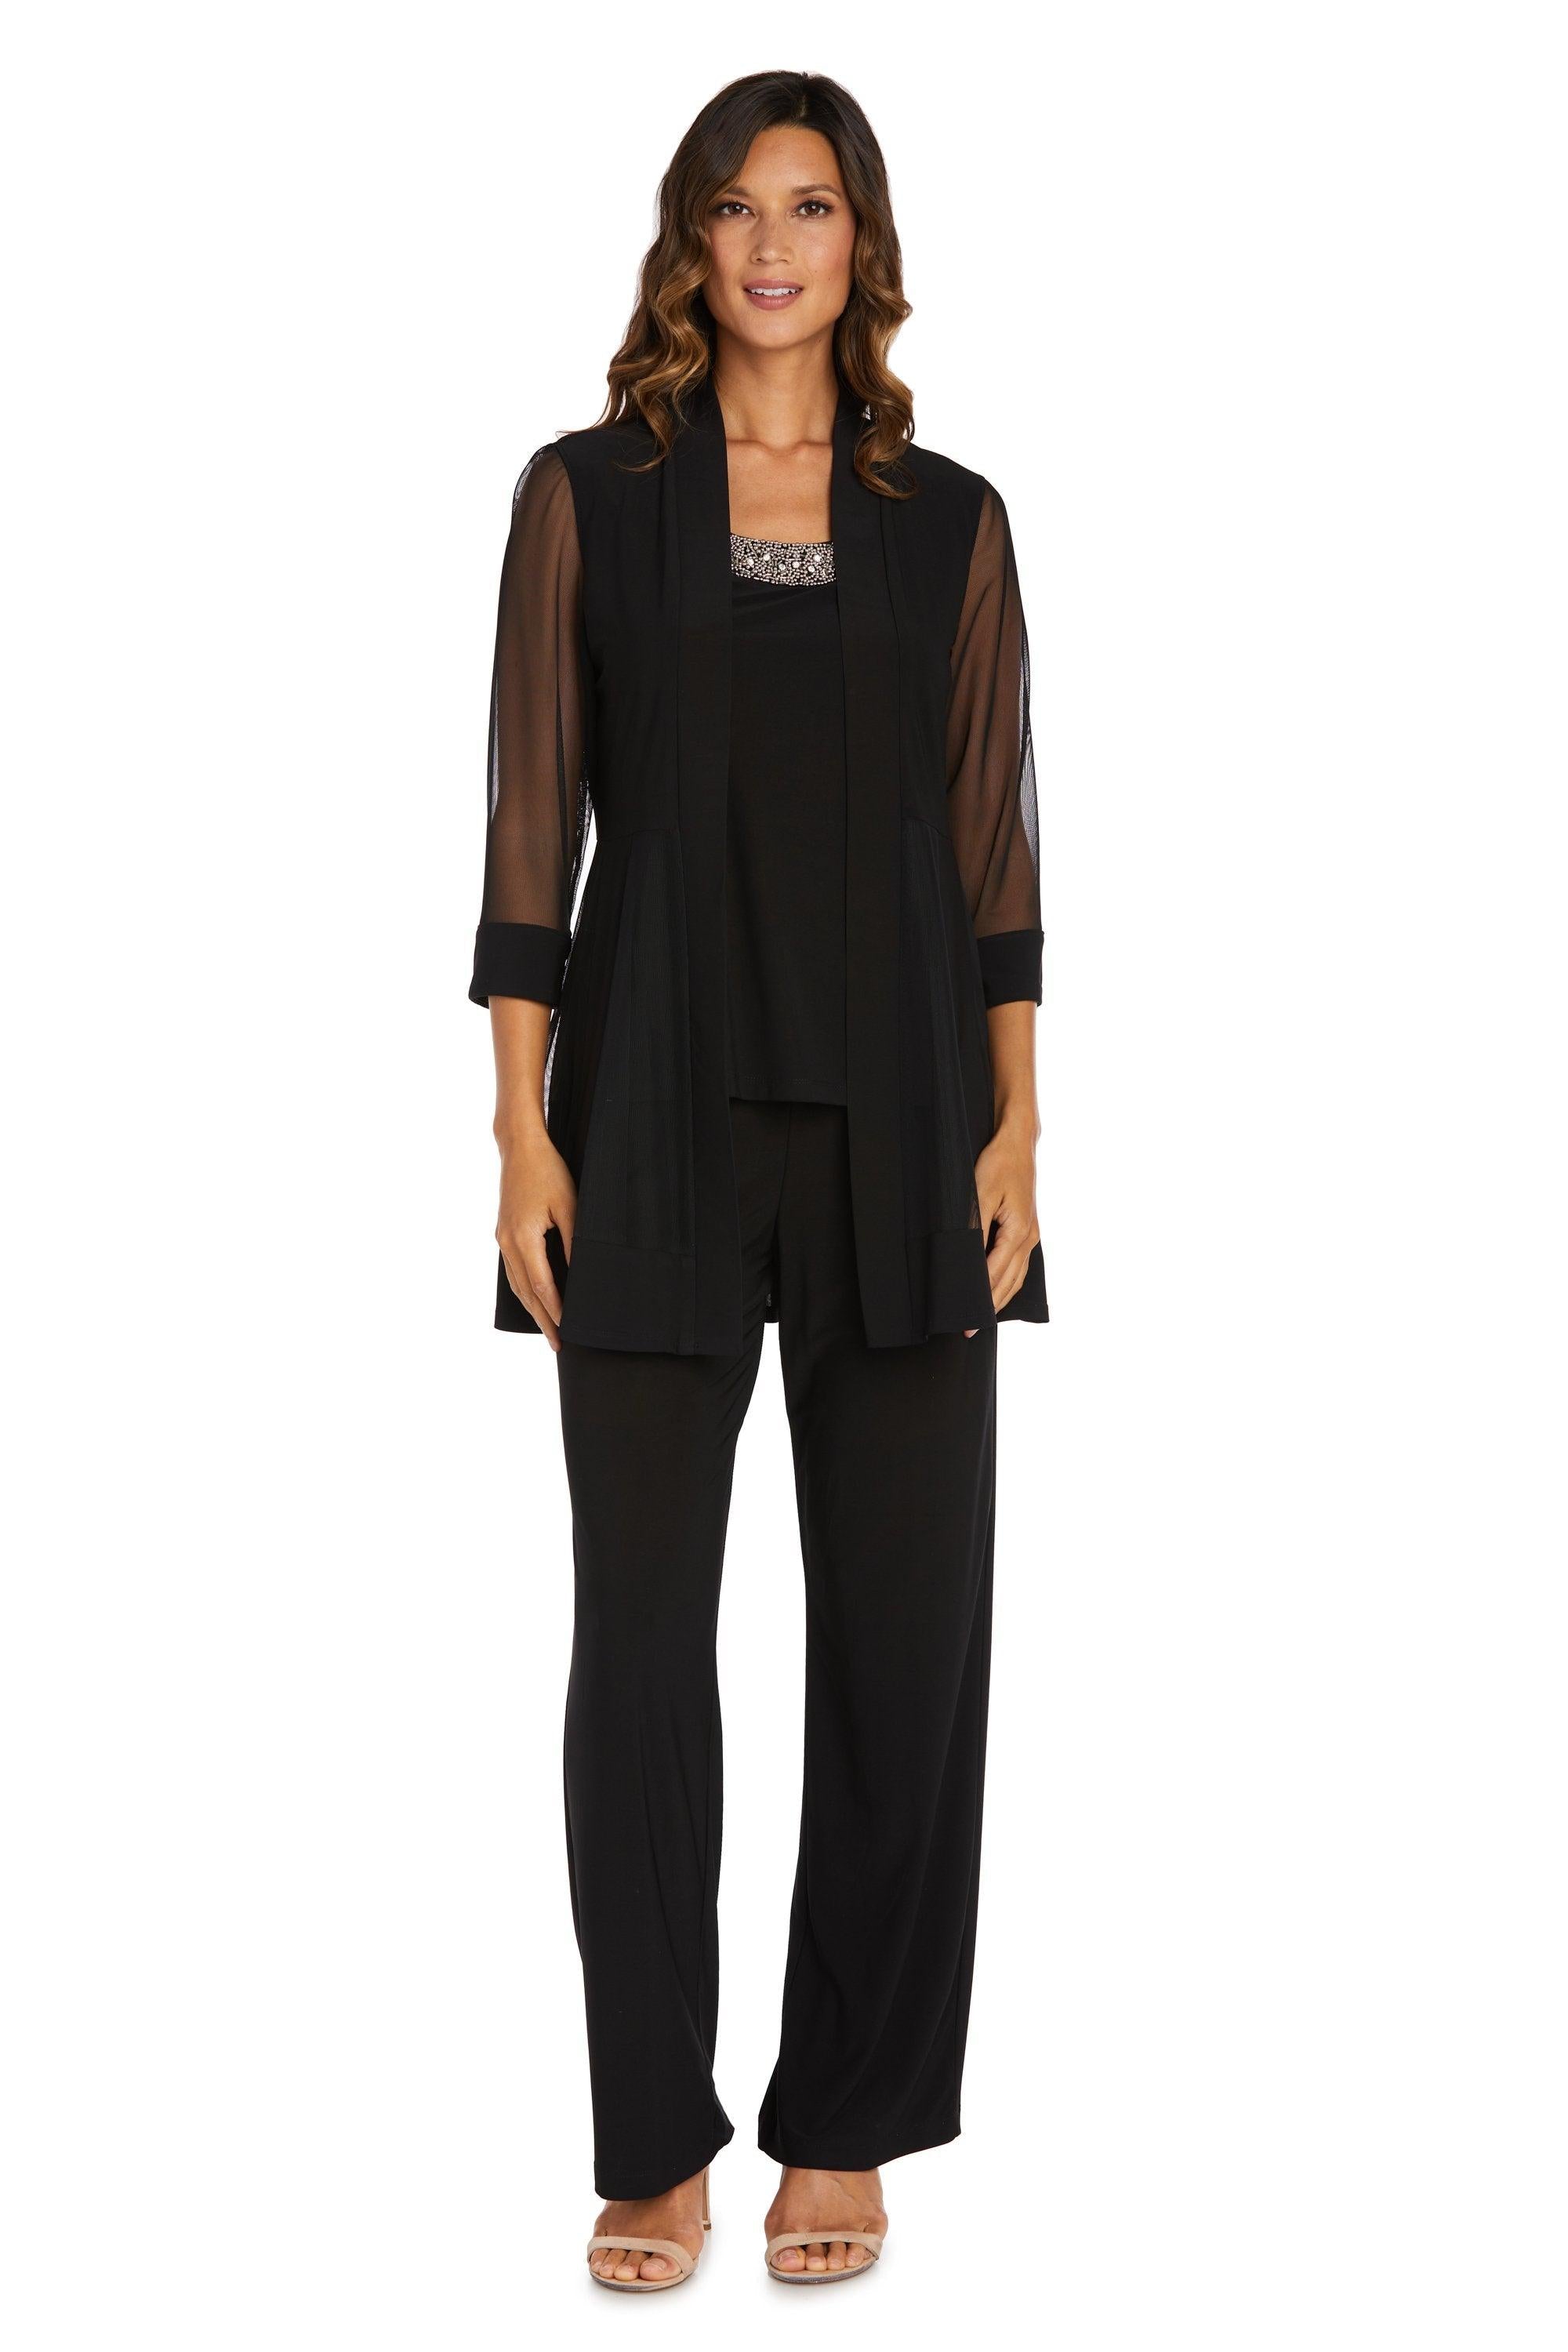 R&M Richards Mother of the Bride Pant Suit 8764P | The Dress Outlet